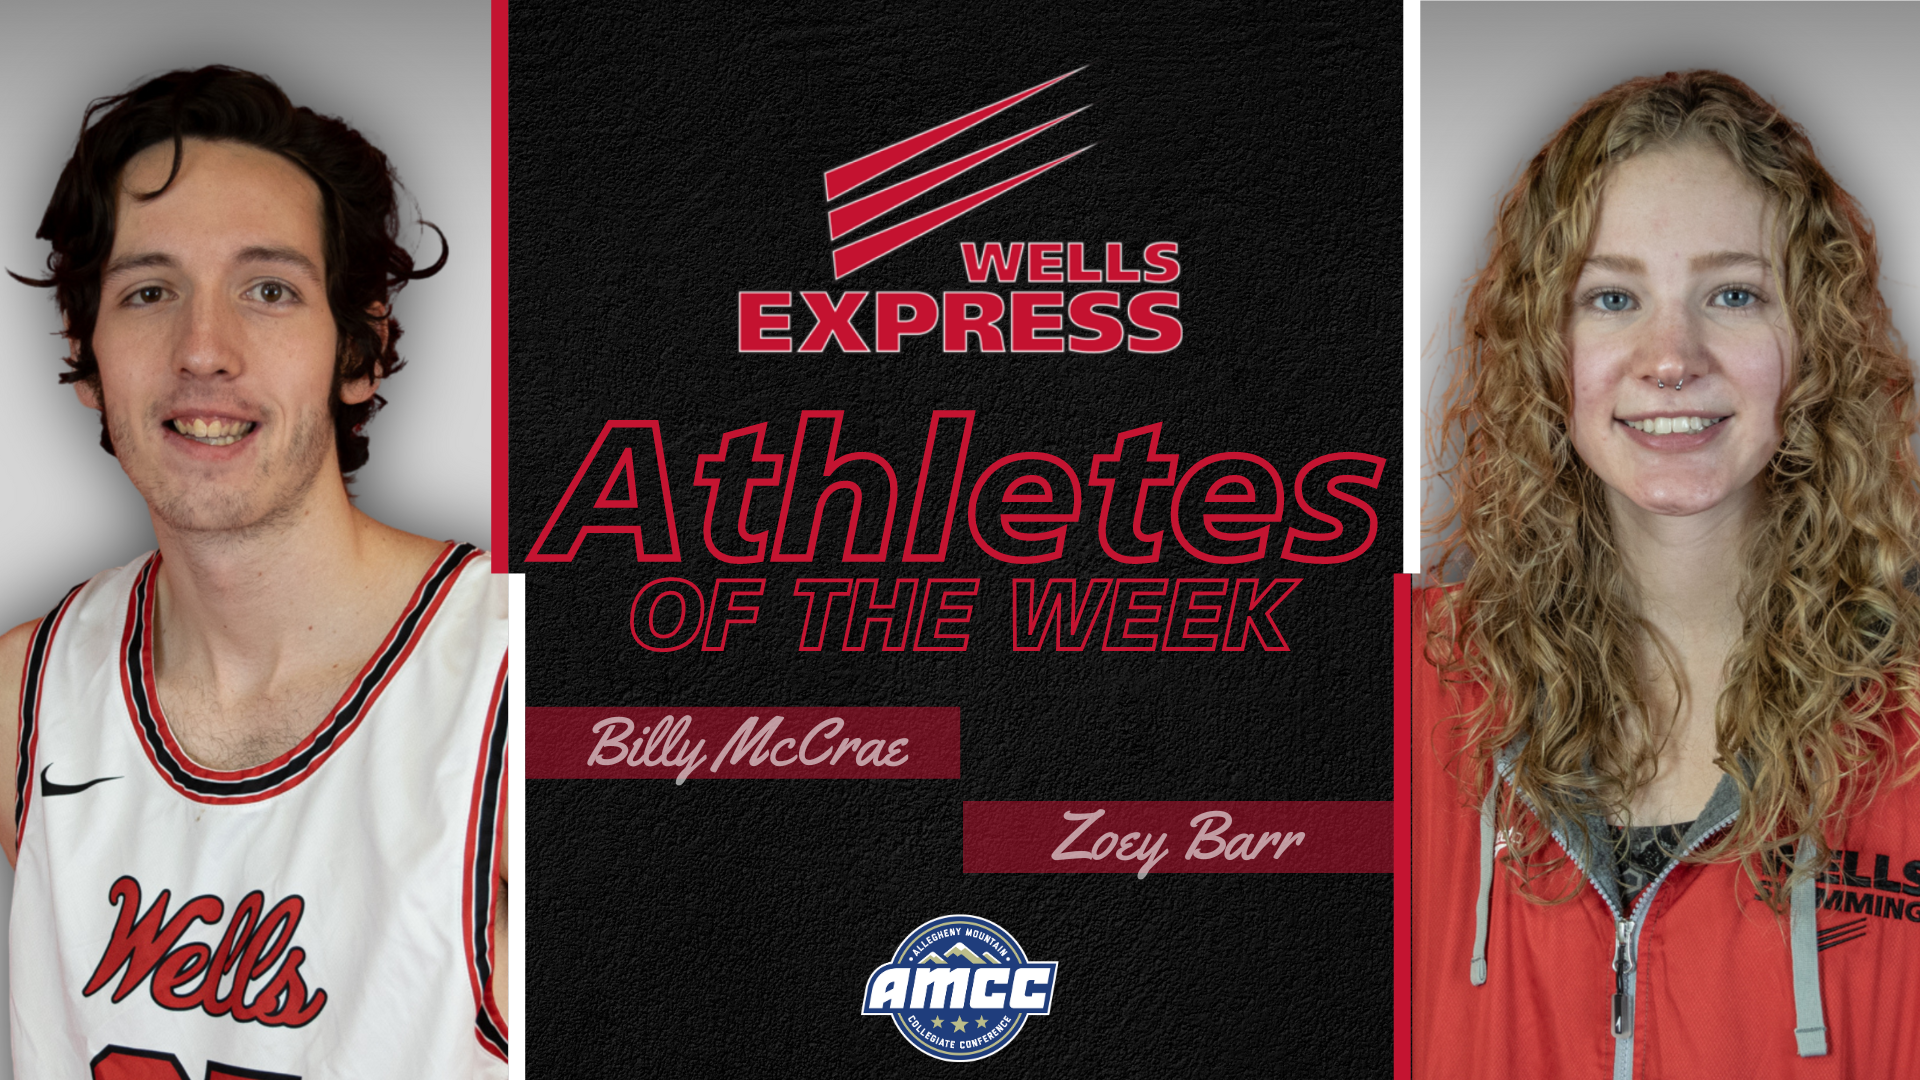 Billy McCrae and Zoey Barr athletes of the week. 